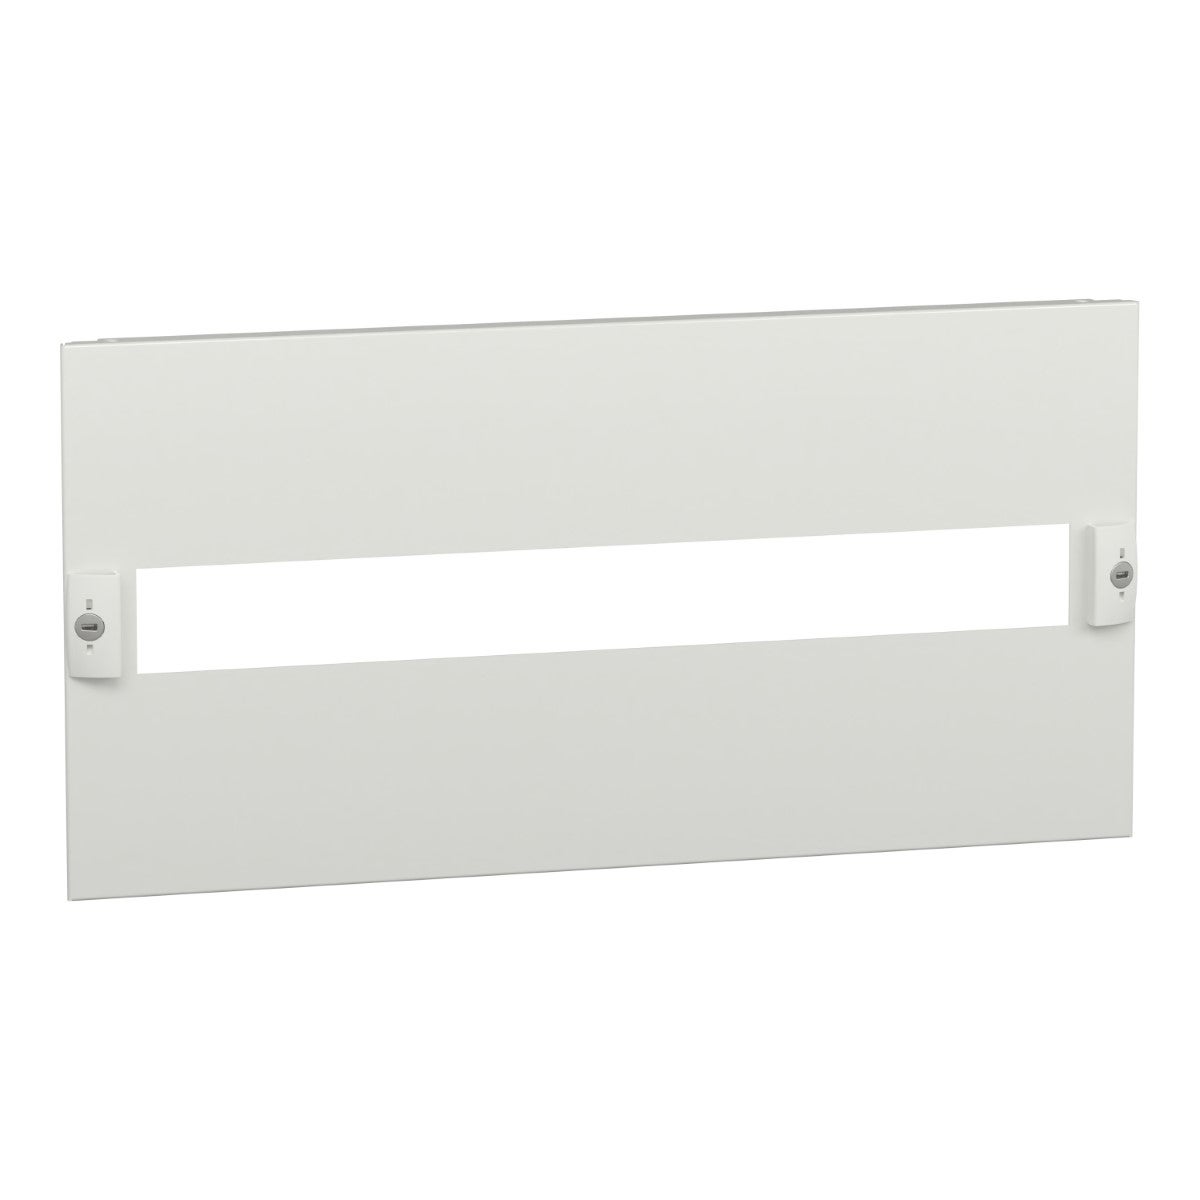 MODULAR FRONT PLATE W600/W650 5M